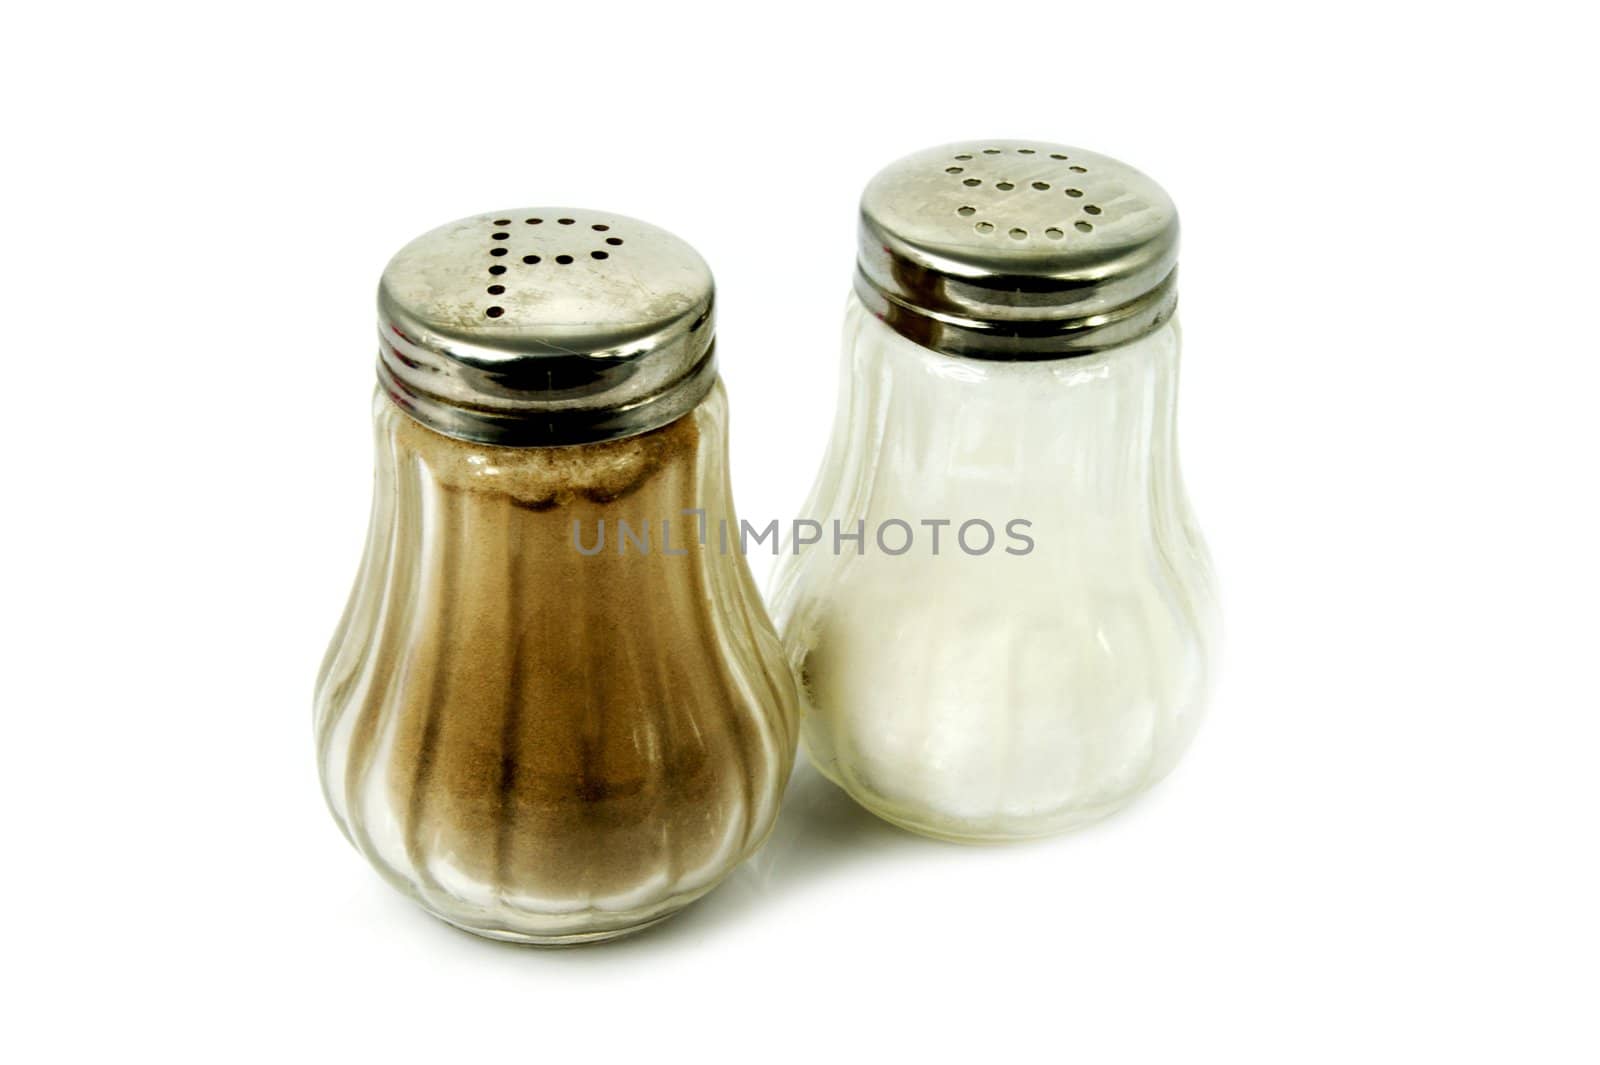 Salt and pepper shaker on white by simpson33